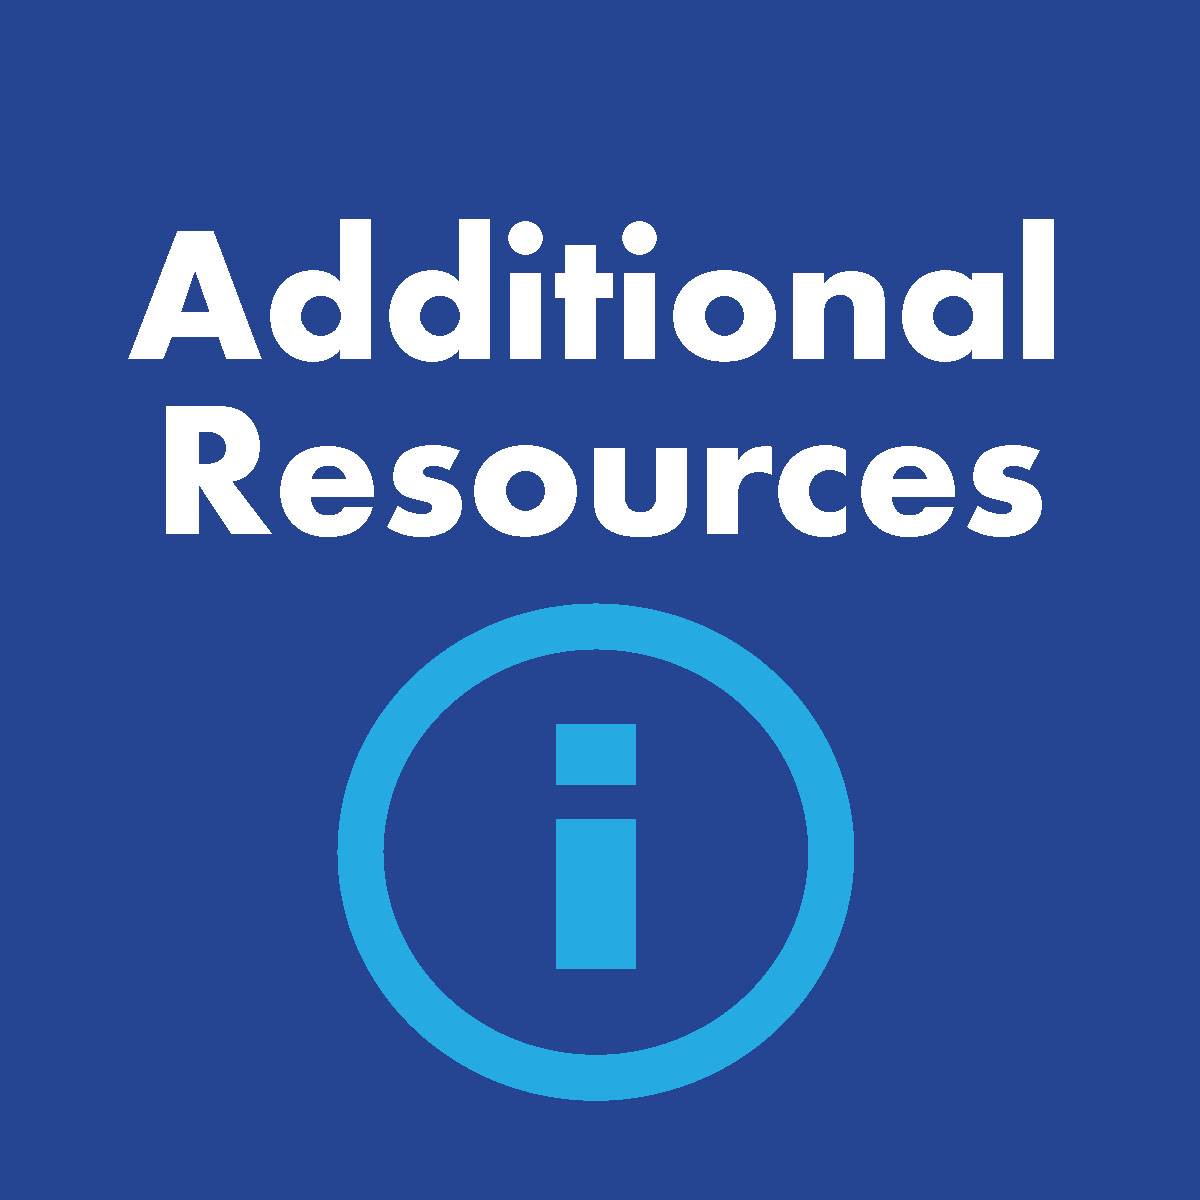 Text Additional Resources